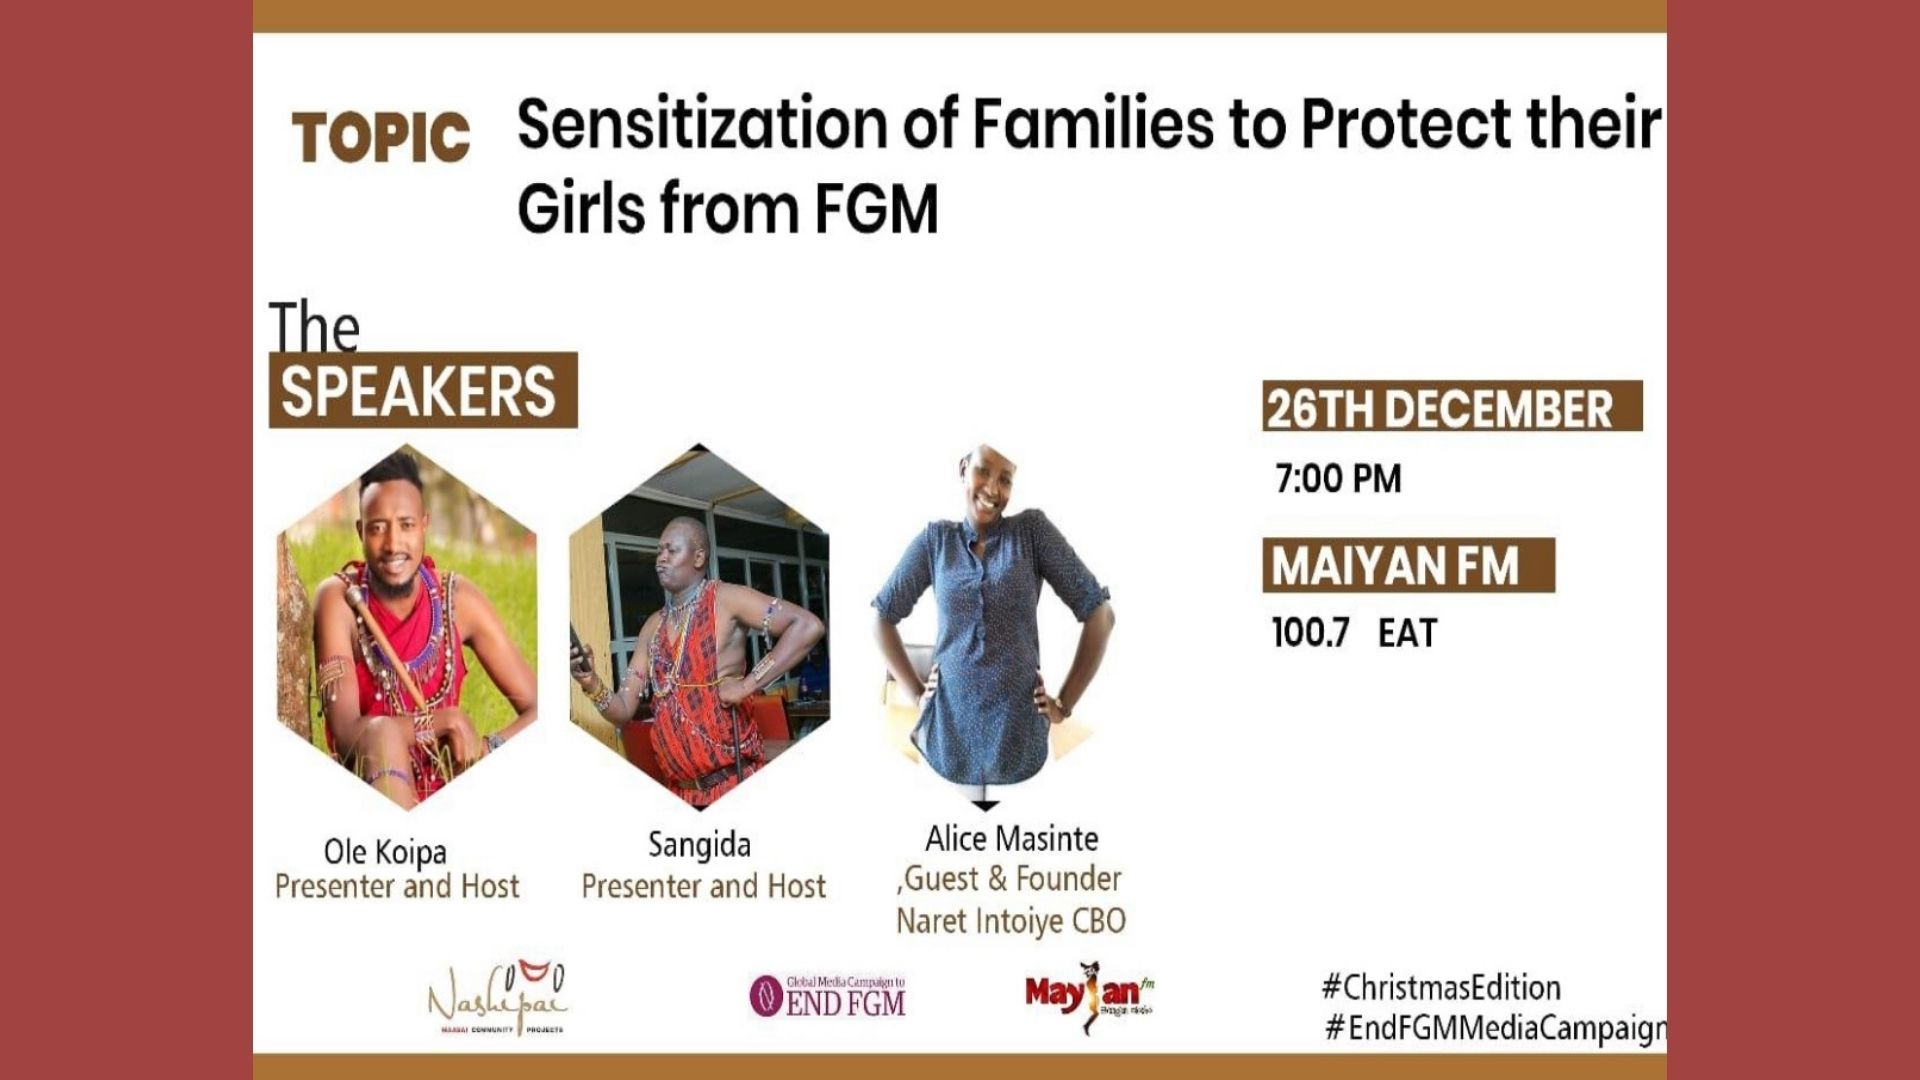 You are currently viewing Male caller on Radio asks how he can report FGM cases, Maasai Land, Kenya